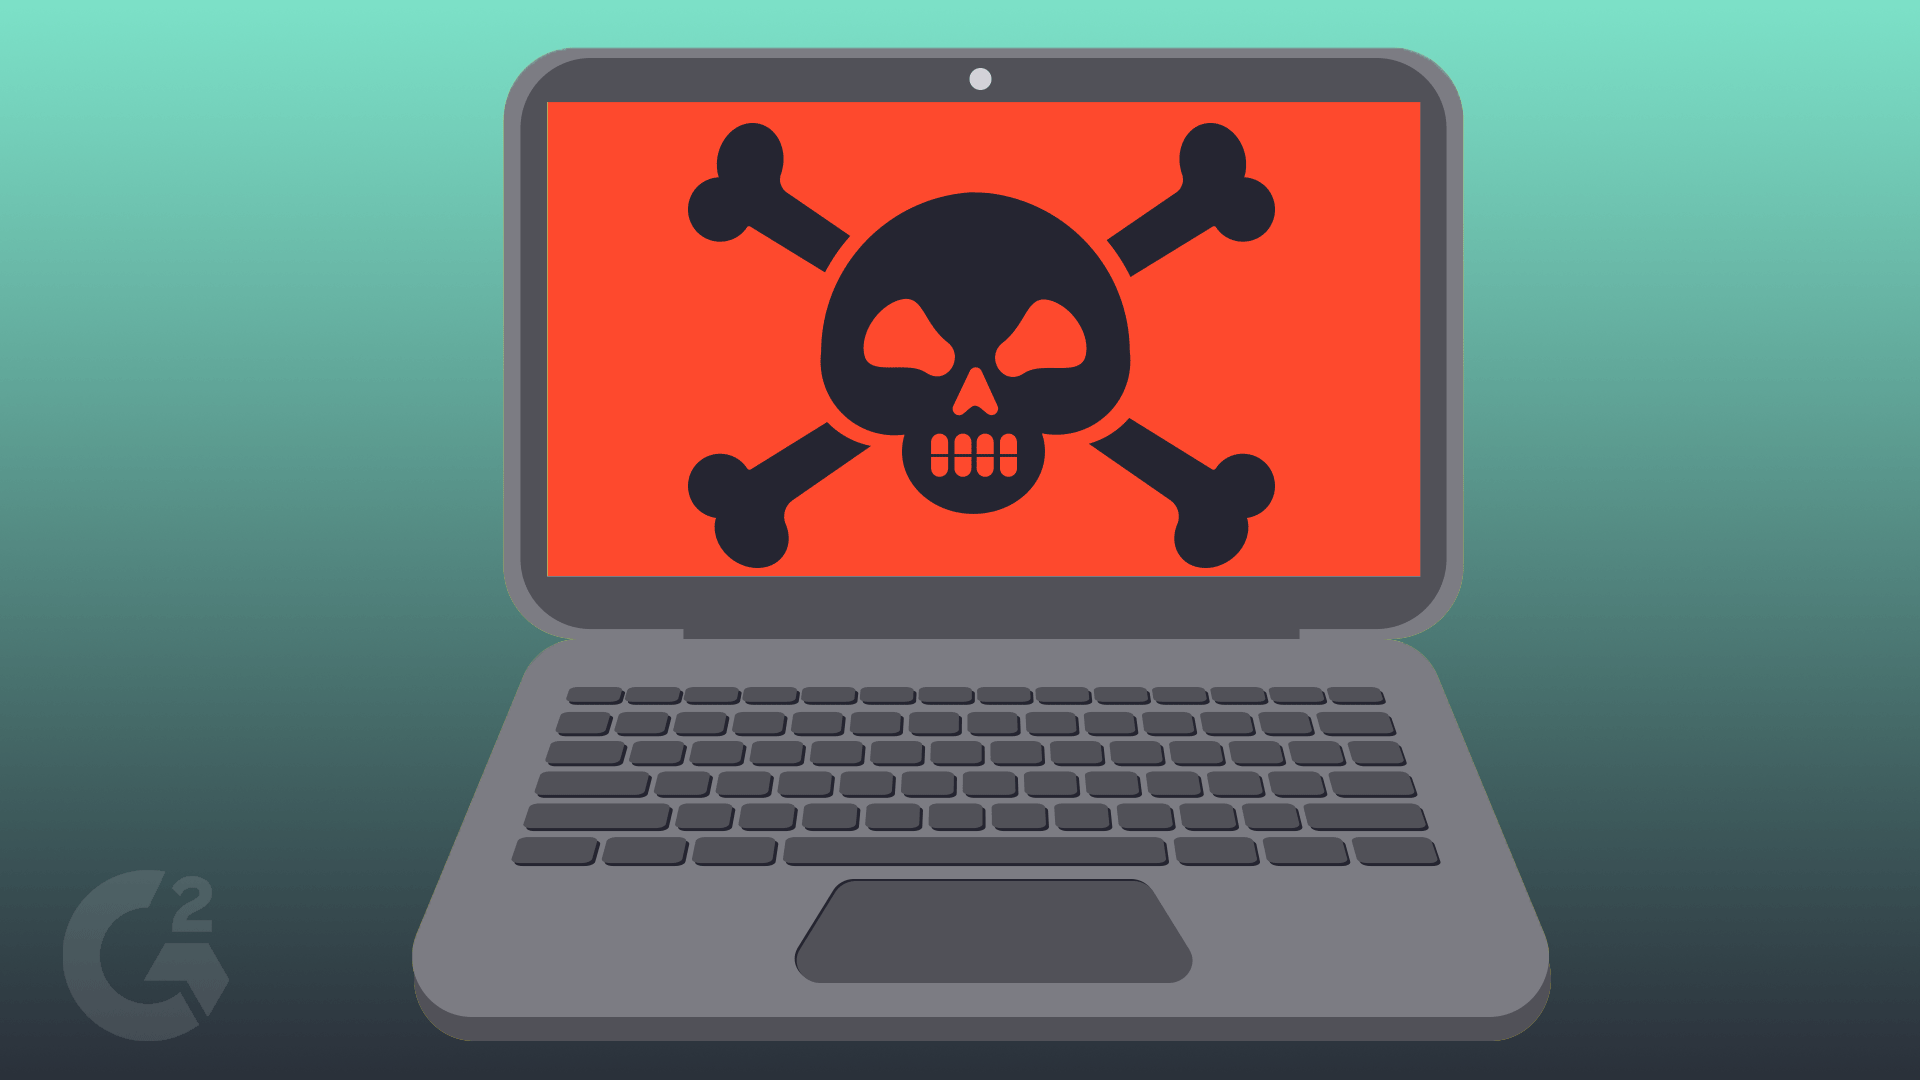 best free malware protection for mac